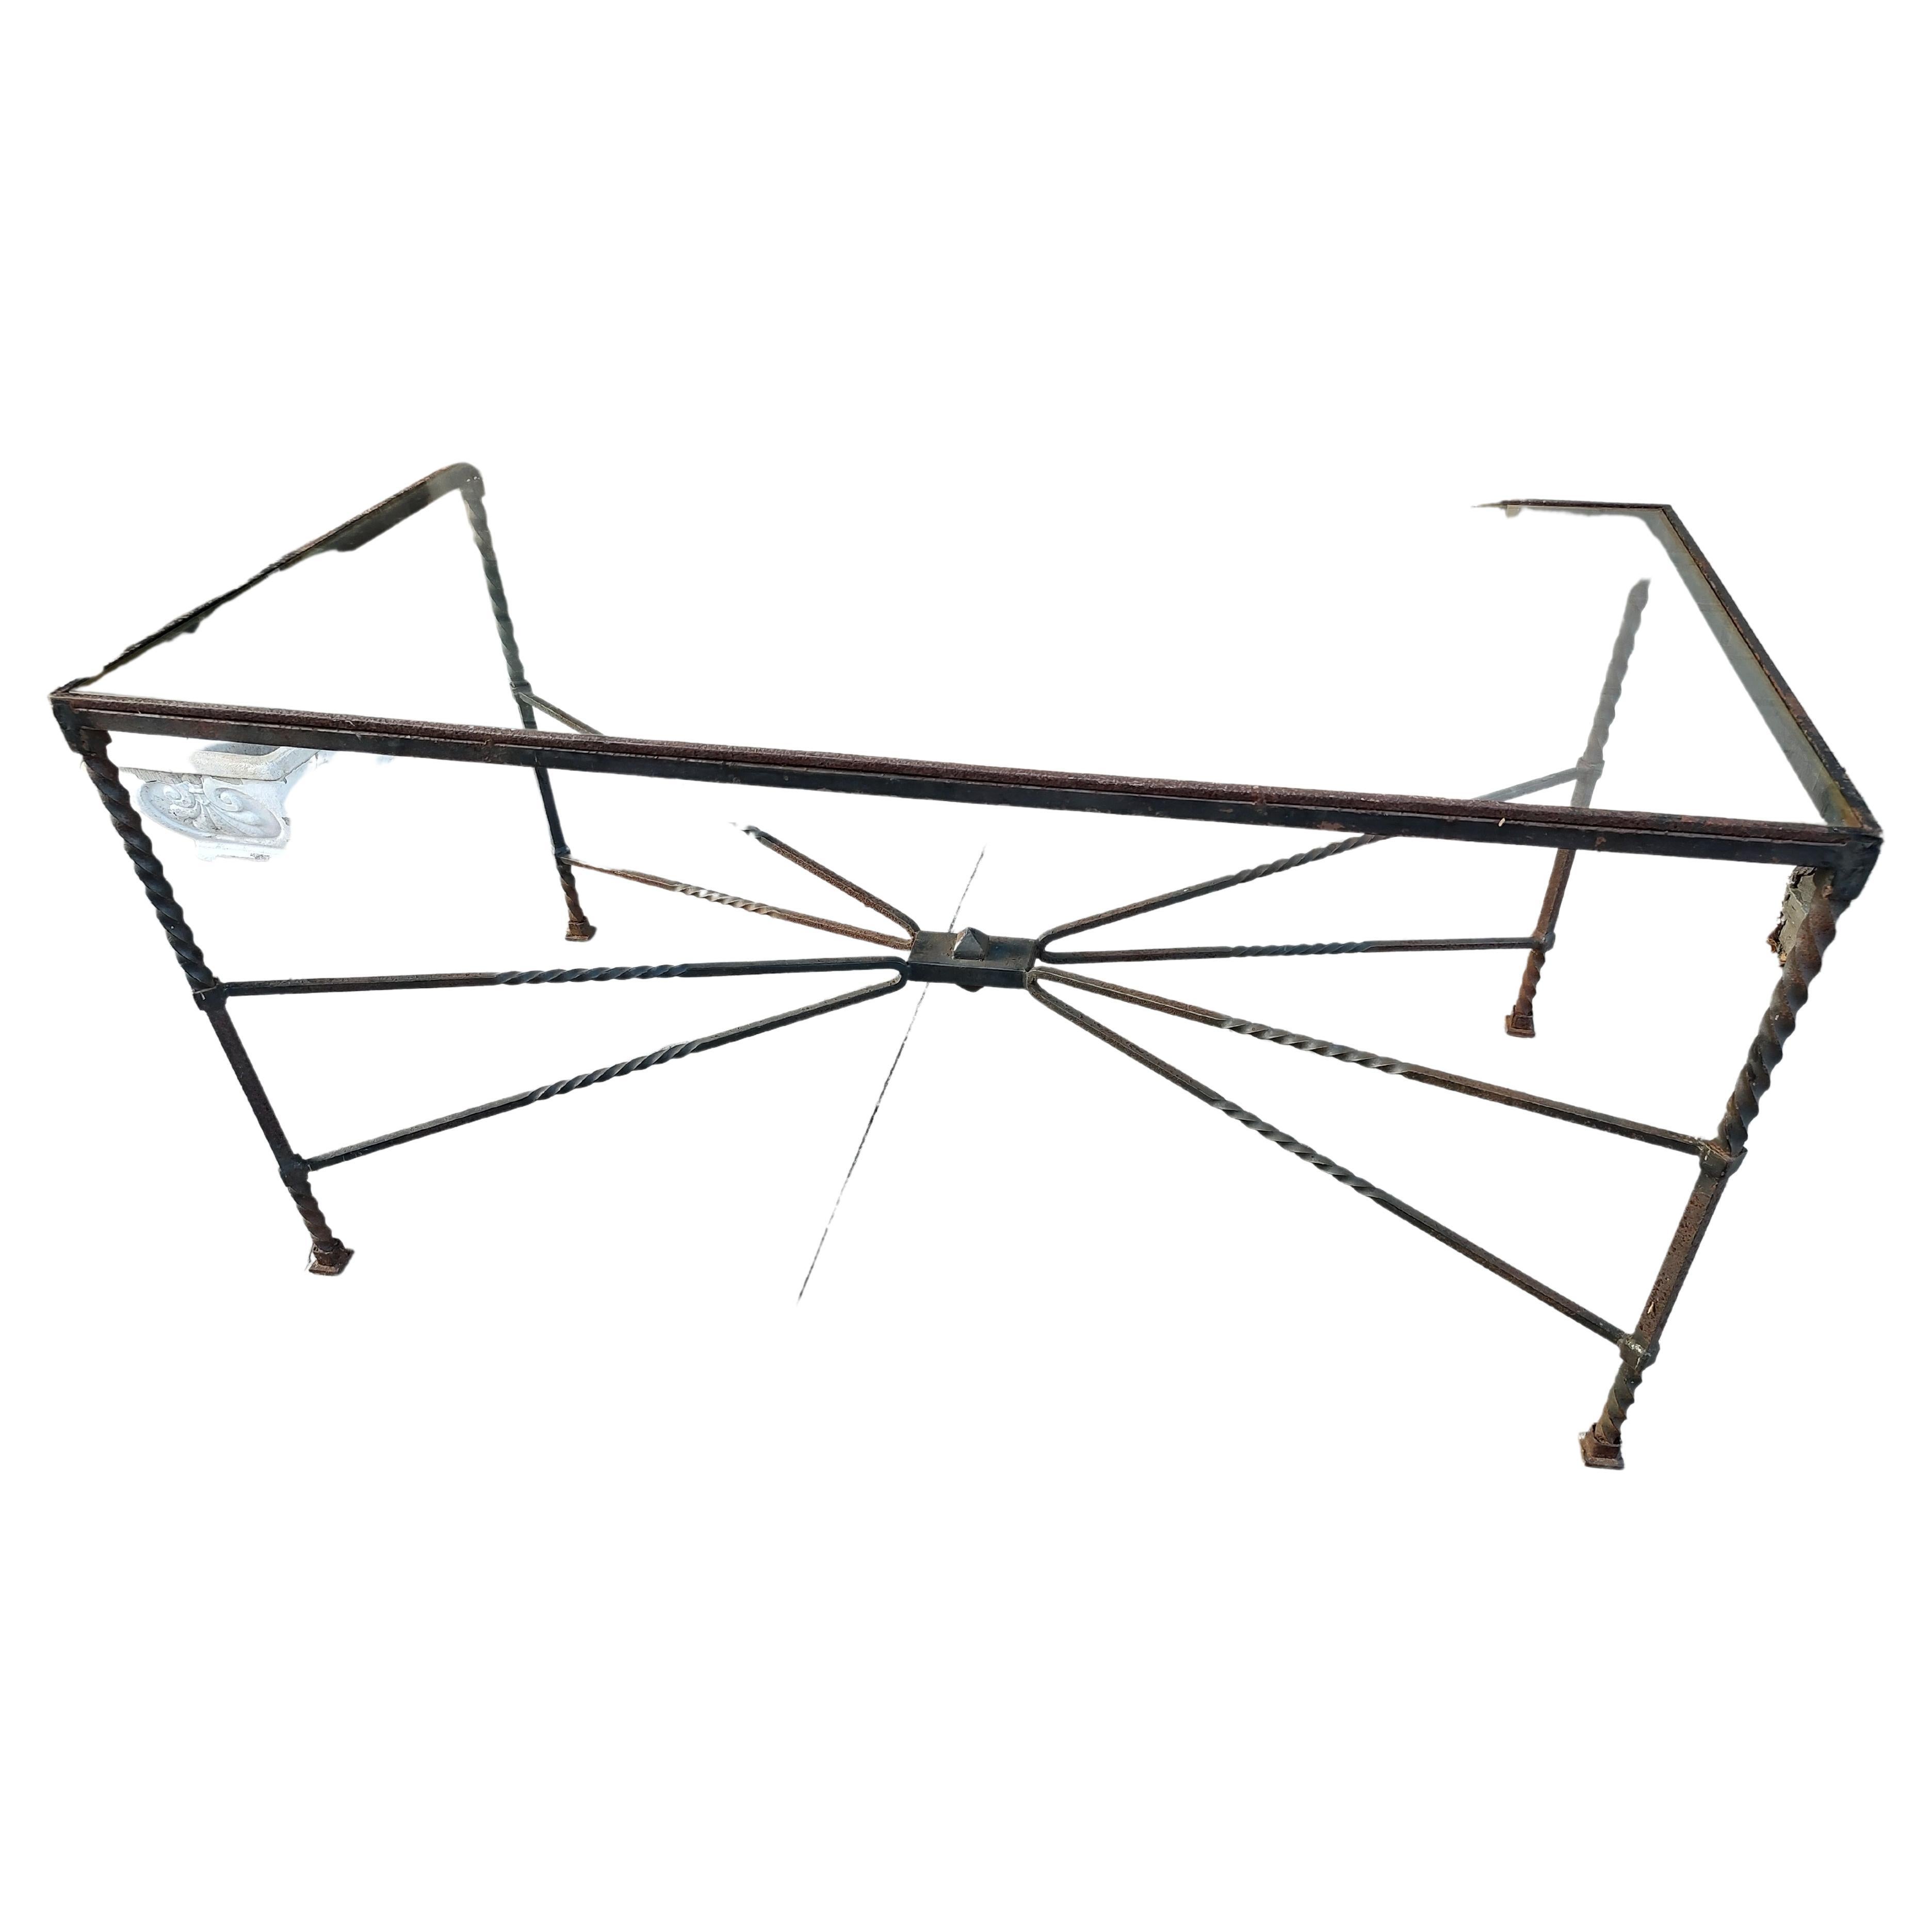 American Mid-Century Modern Sculptural Hand Wrought Iron Table with Glass Top For Sale